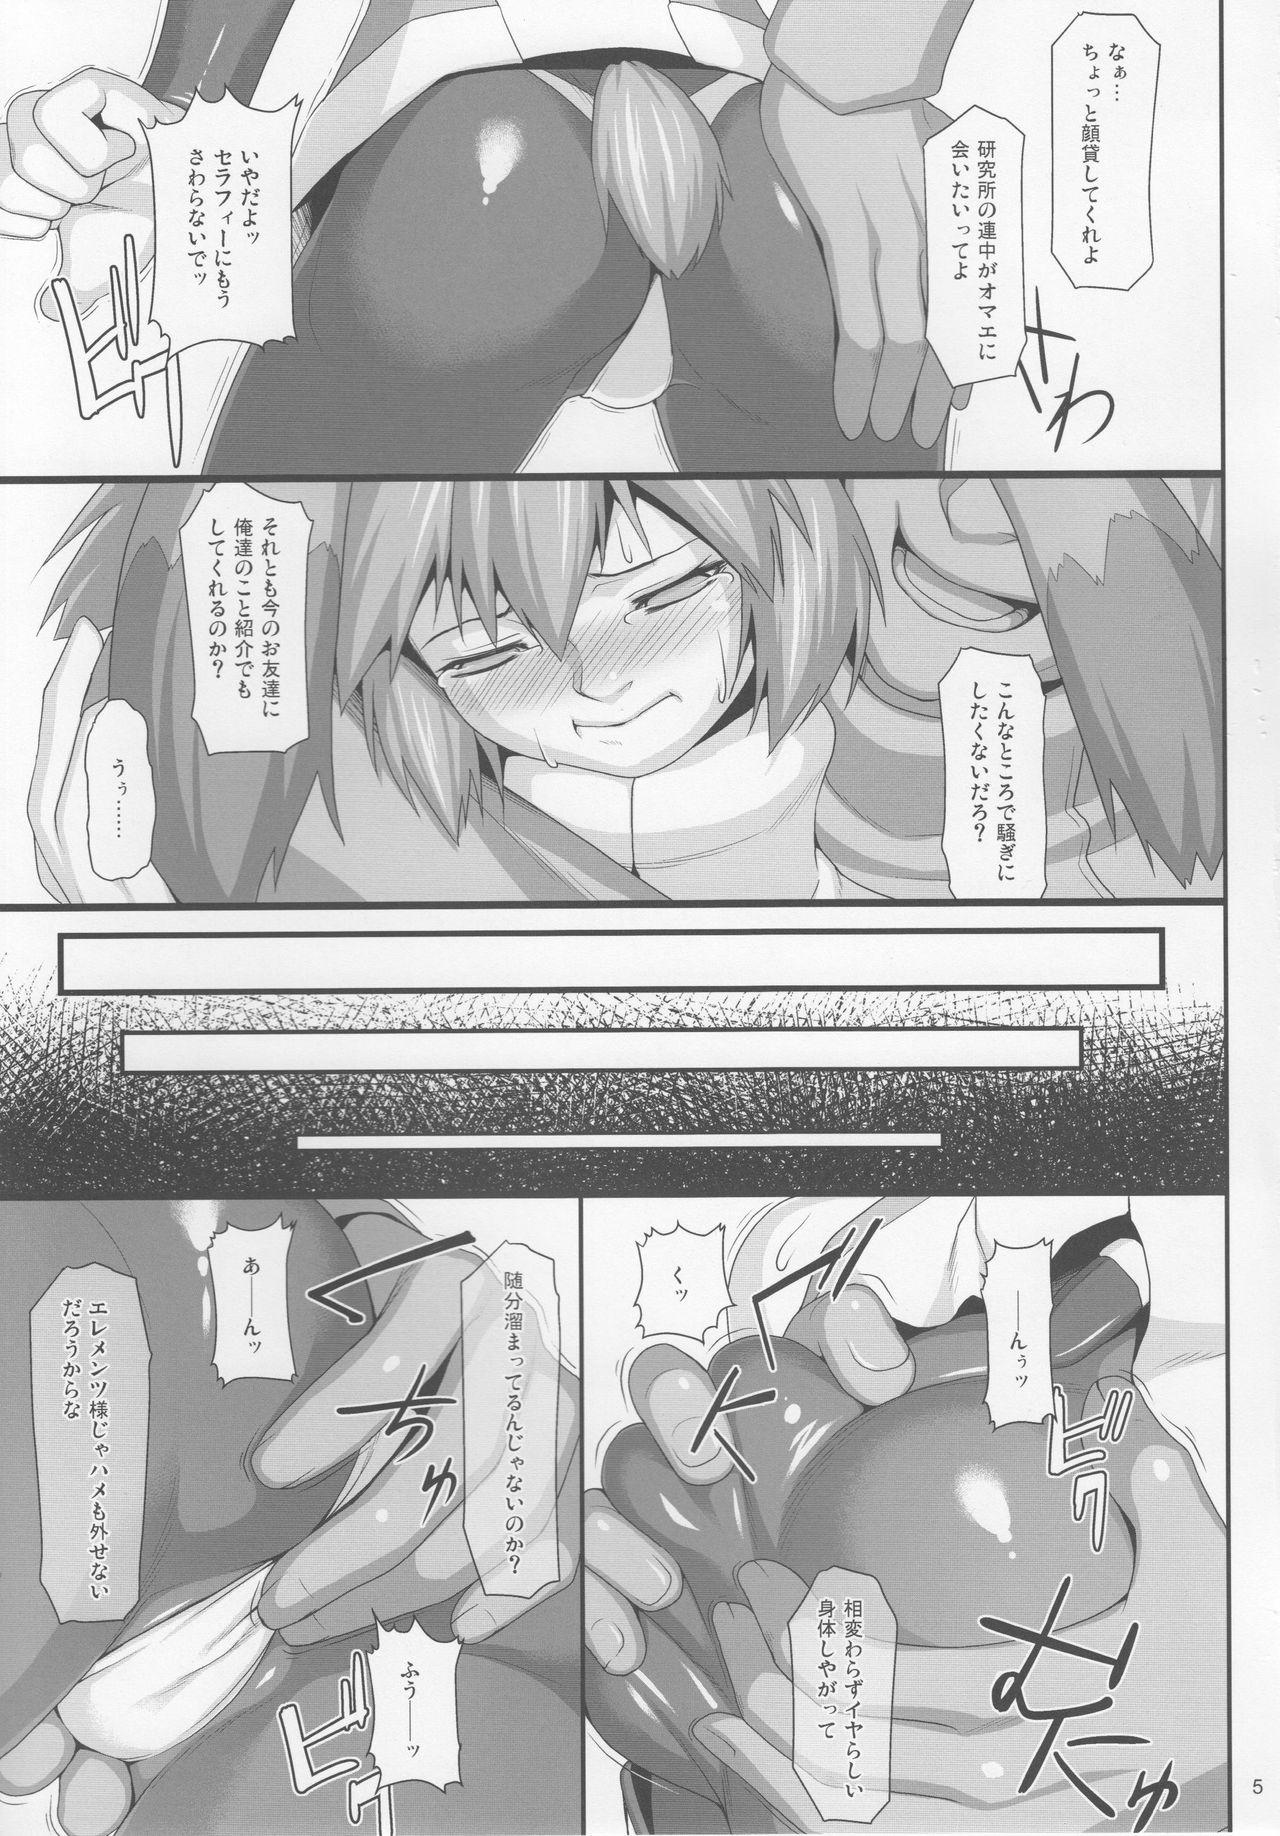 Gay Seraphic Gate 4 - Xenogears Reality - Page 4